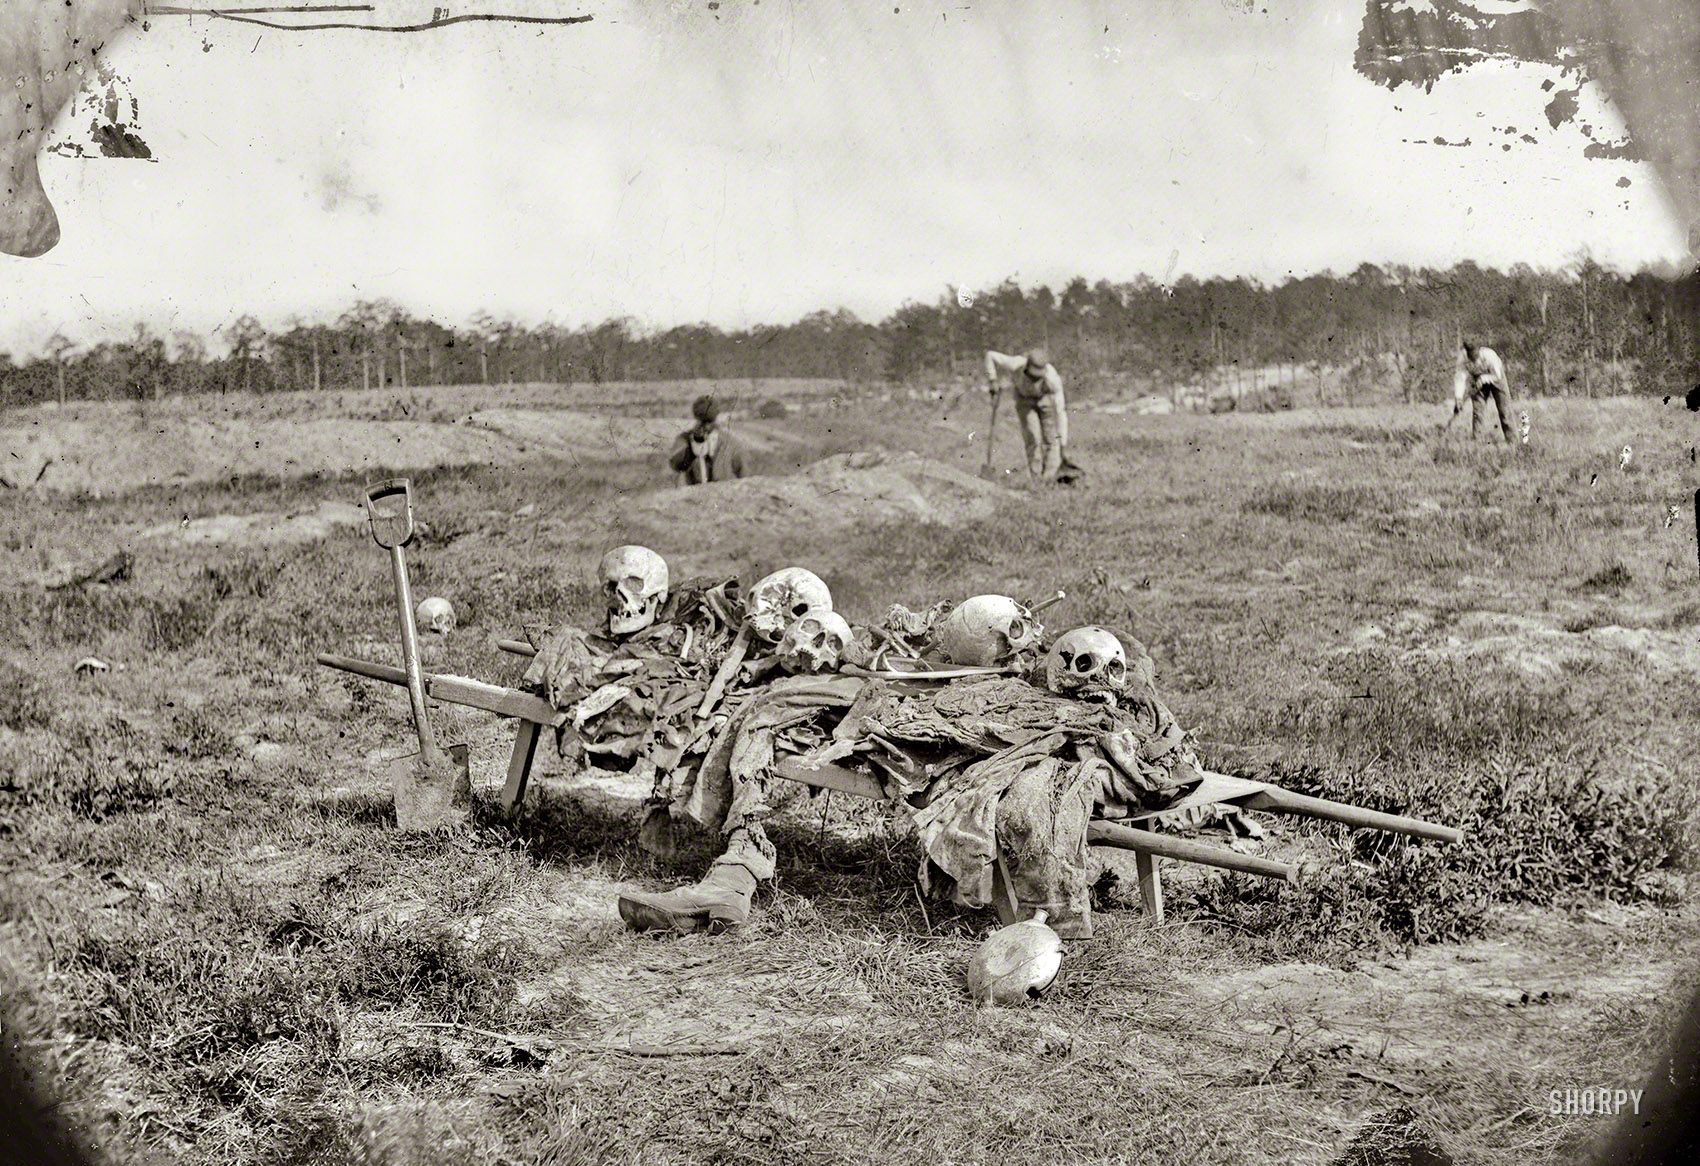 April 1865. "Cold Harbor, Virginia. Collecting remains of dead on the battlefield after the war." Memento mori. Wet plate by John Reekie. View full size.